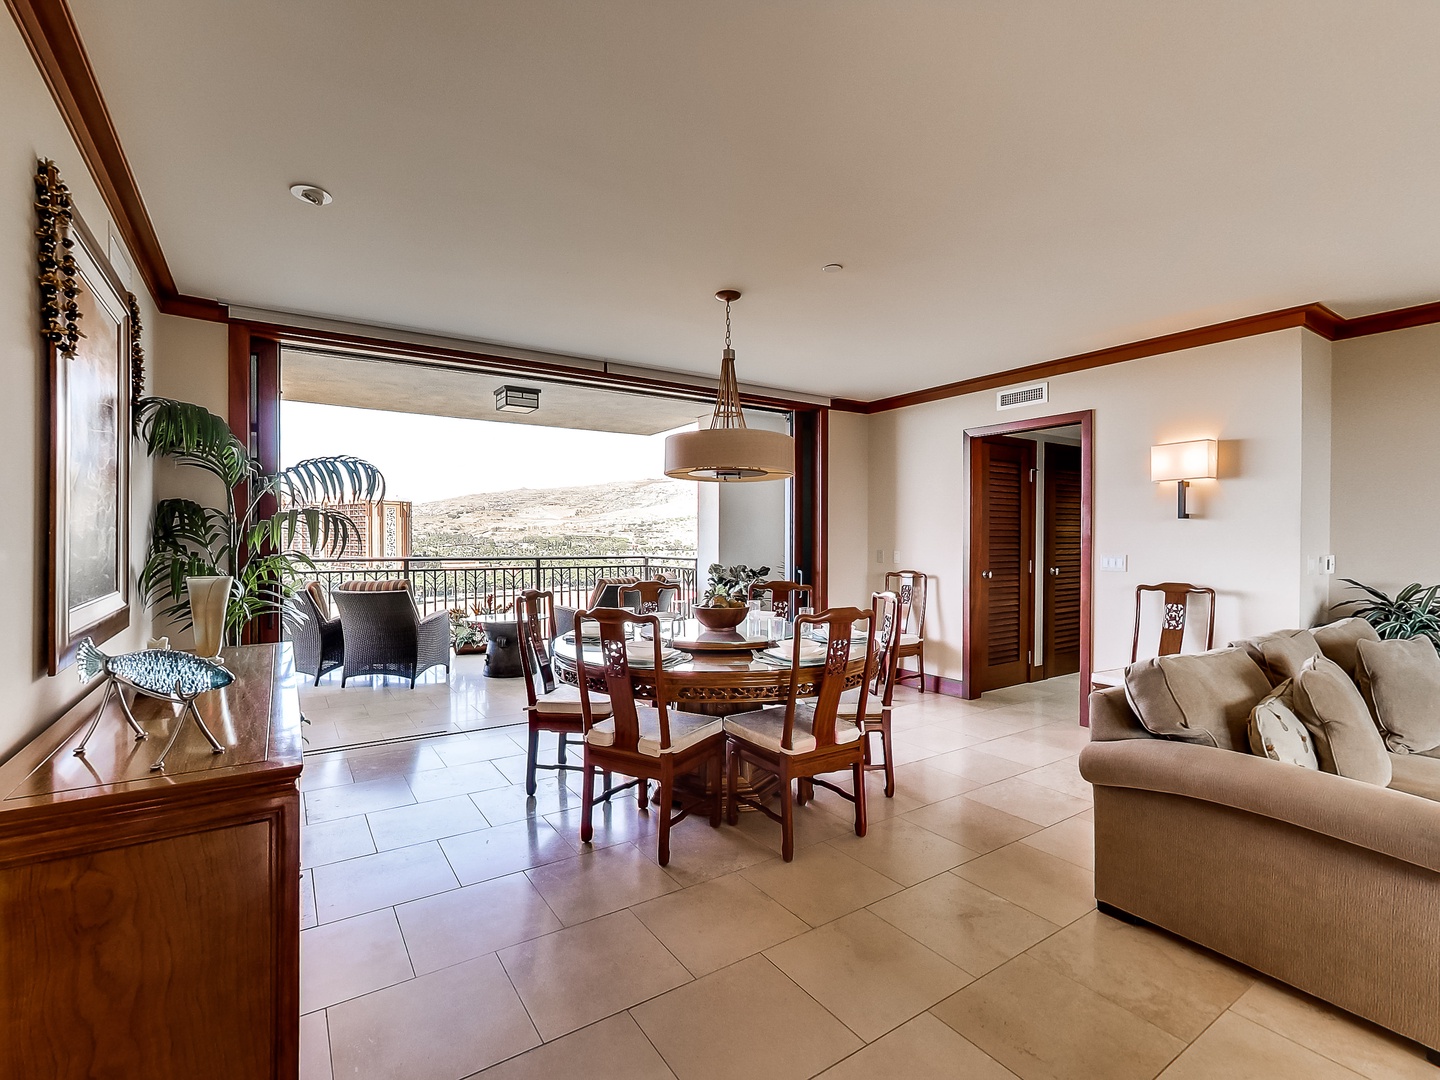 Kapolei Vacation Rentals, Ko Olina Beach Villas O1011 - Experience seamless living in the comfort of your own space.